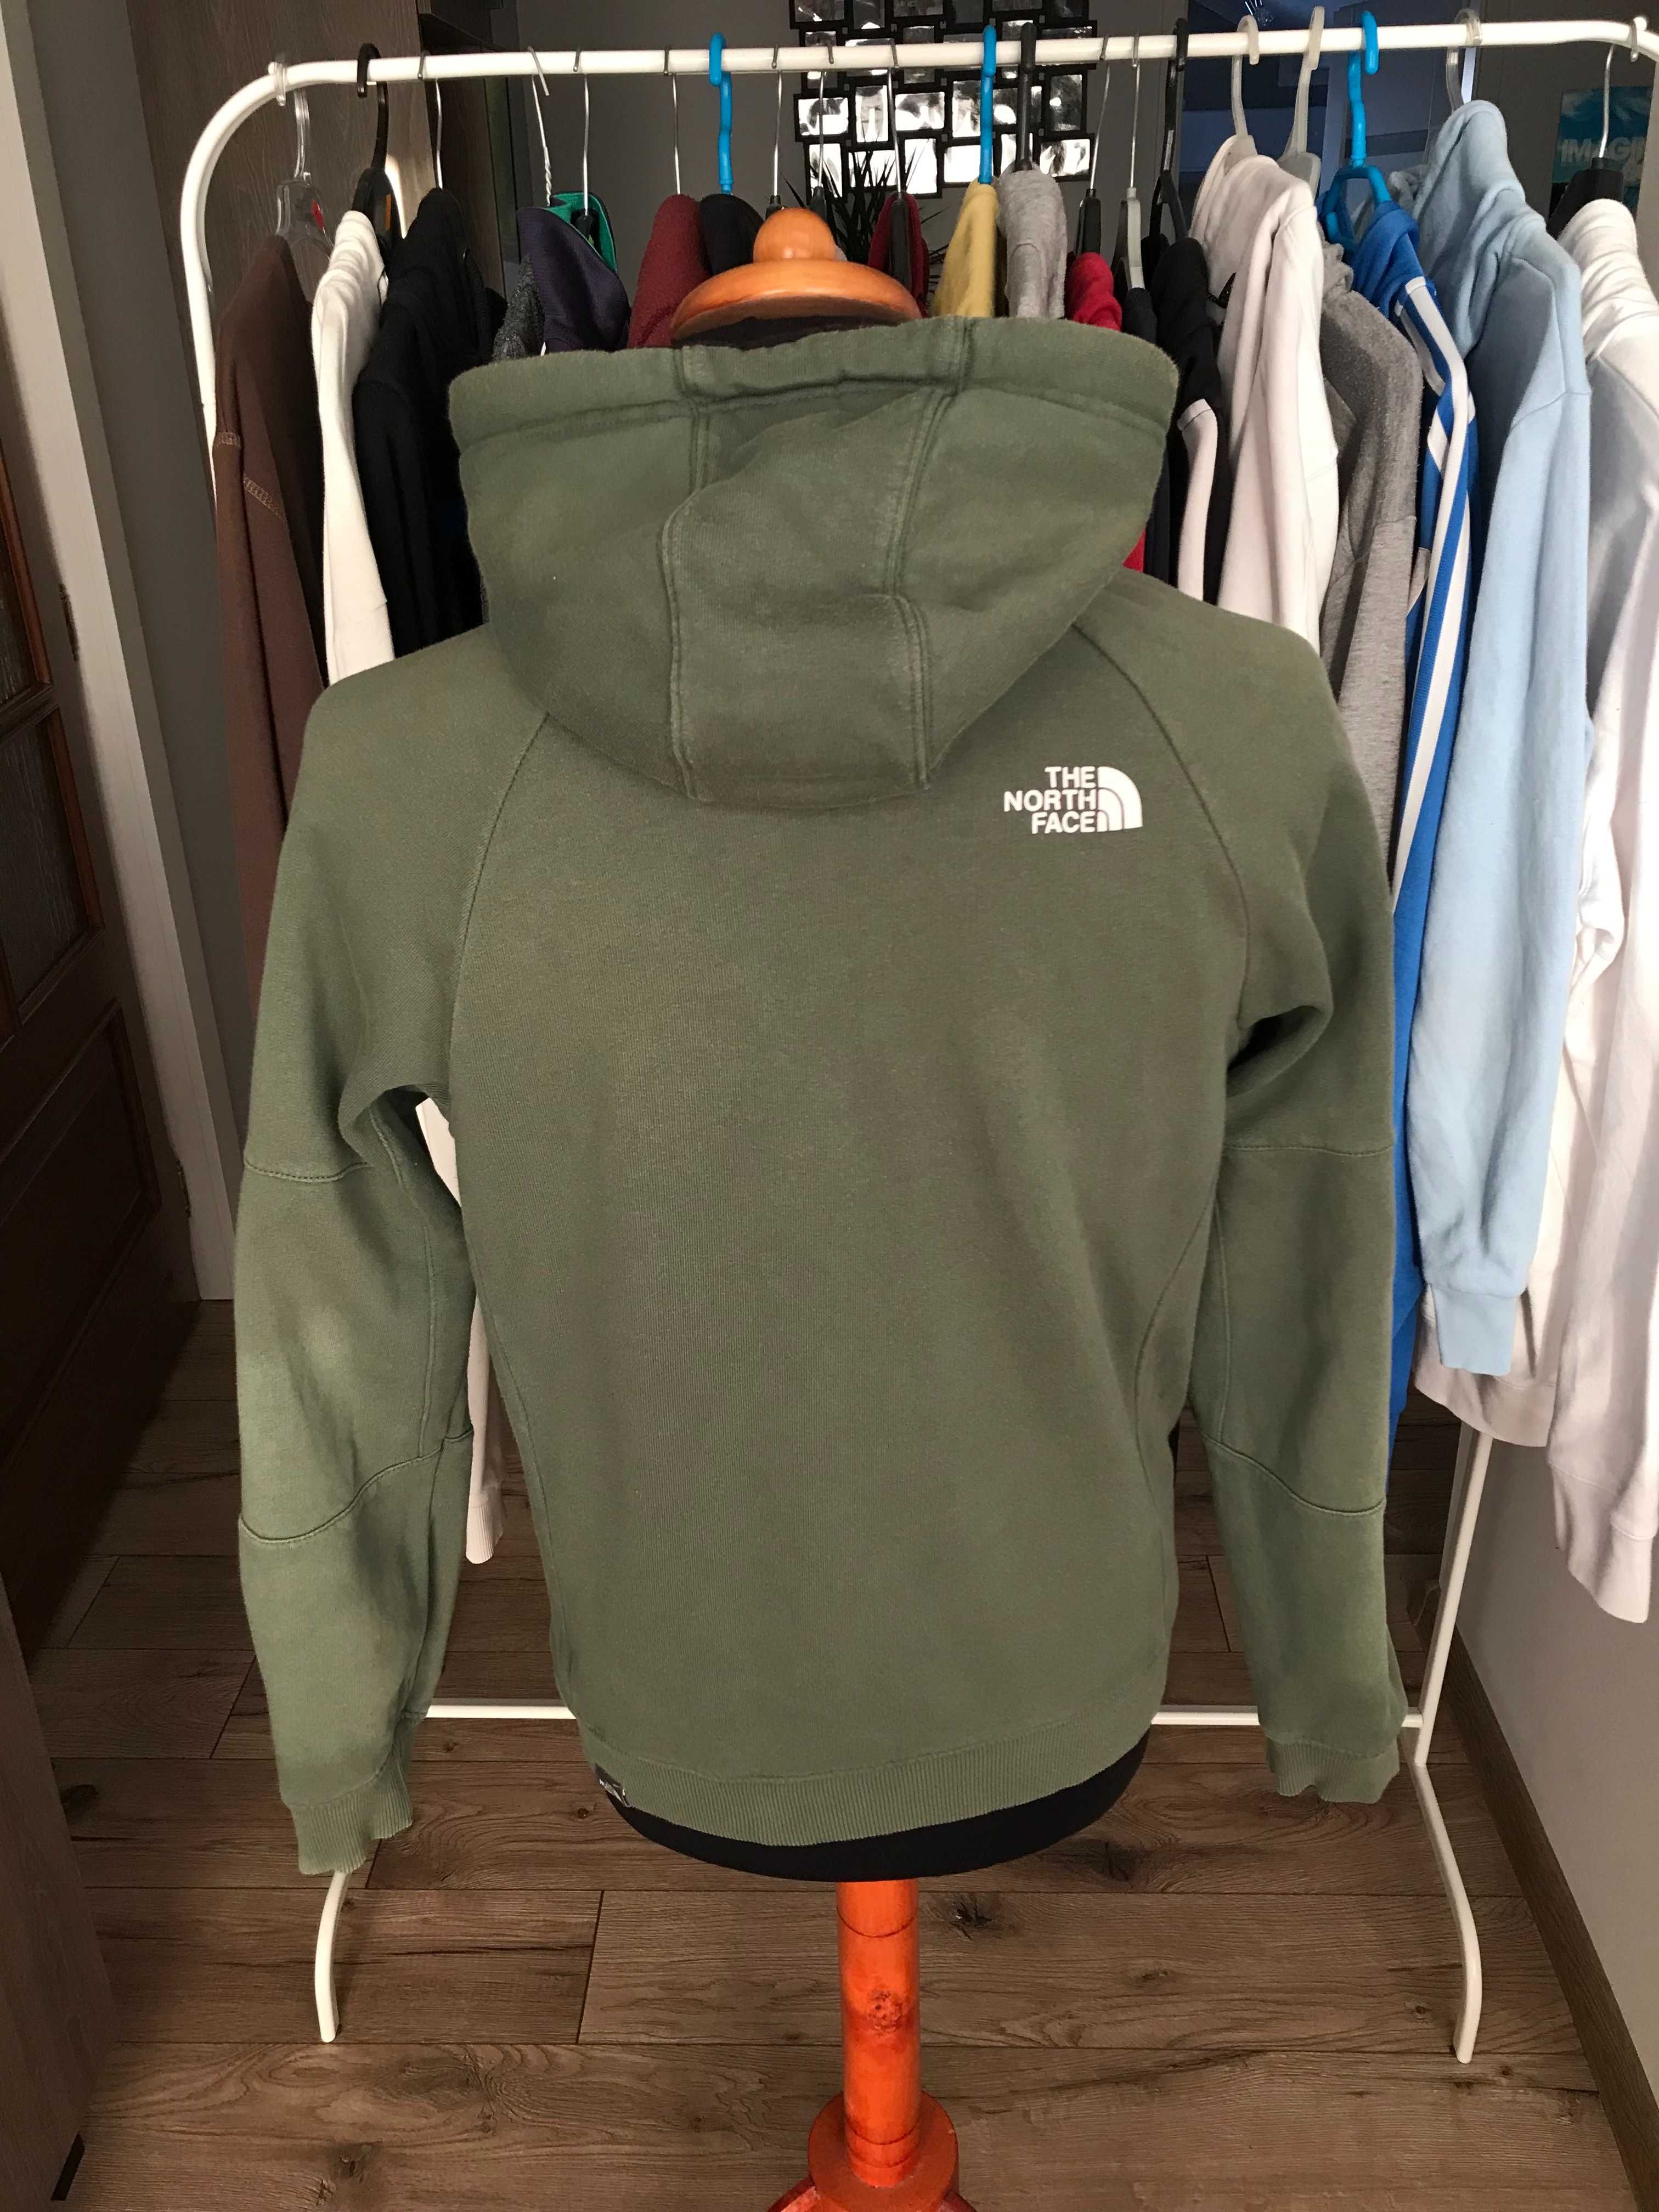 Bluza hoodie The North  Face rozm. S